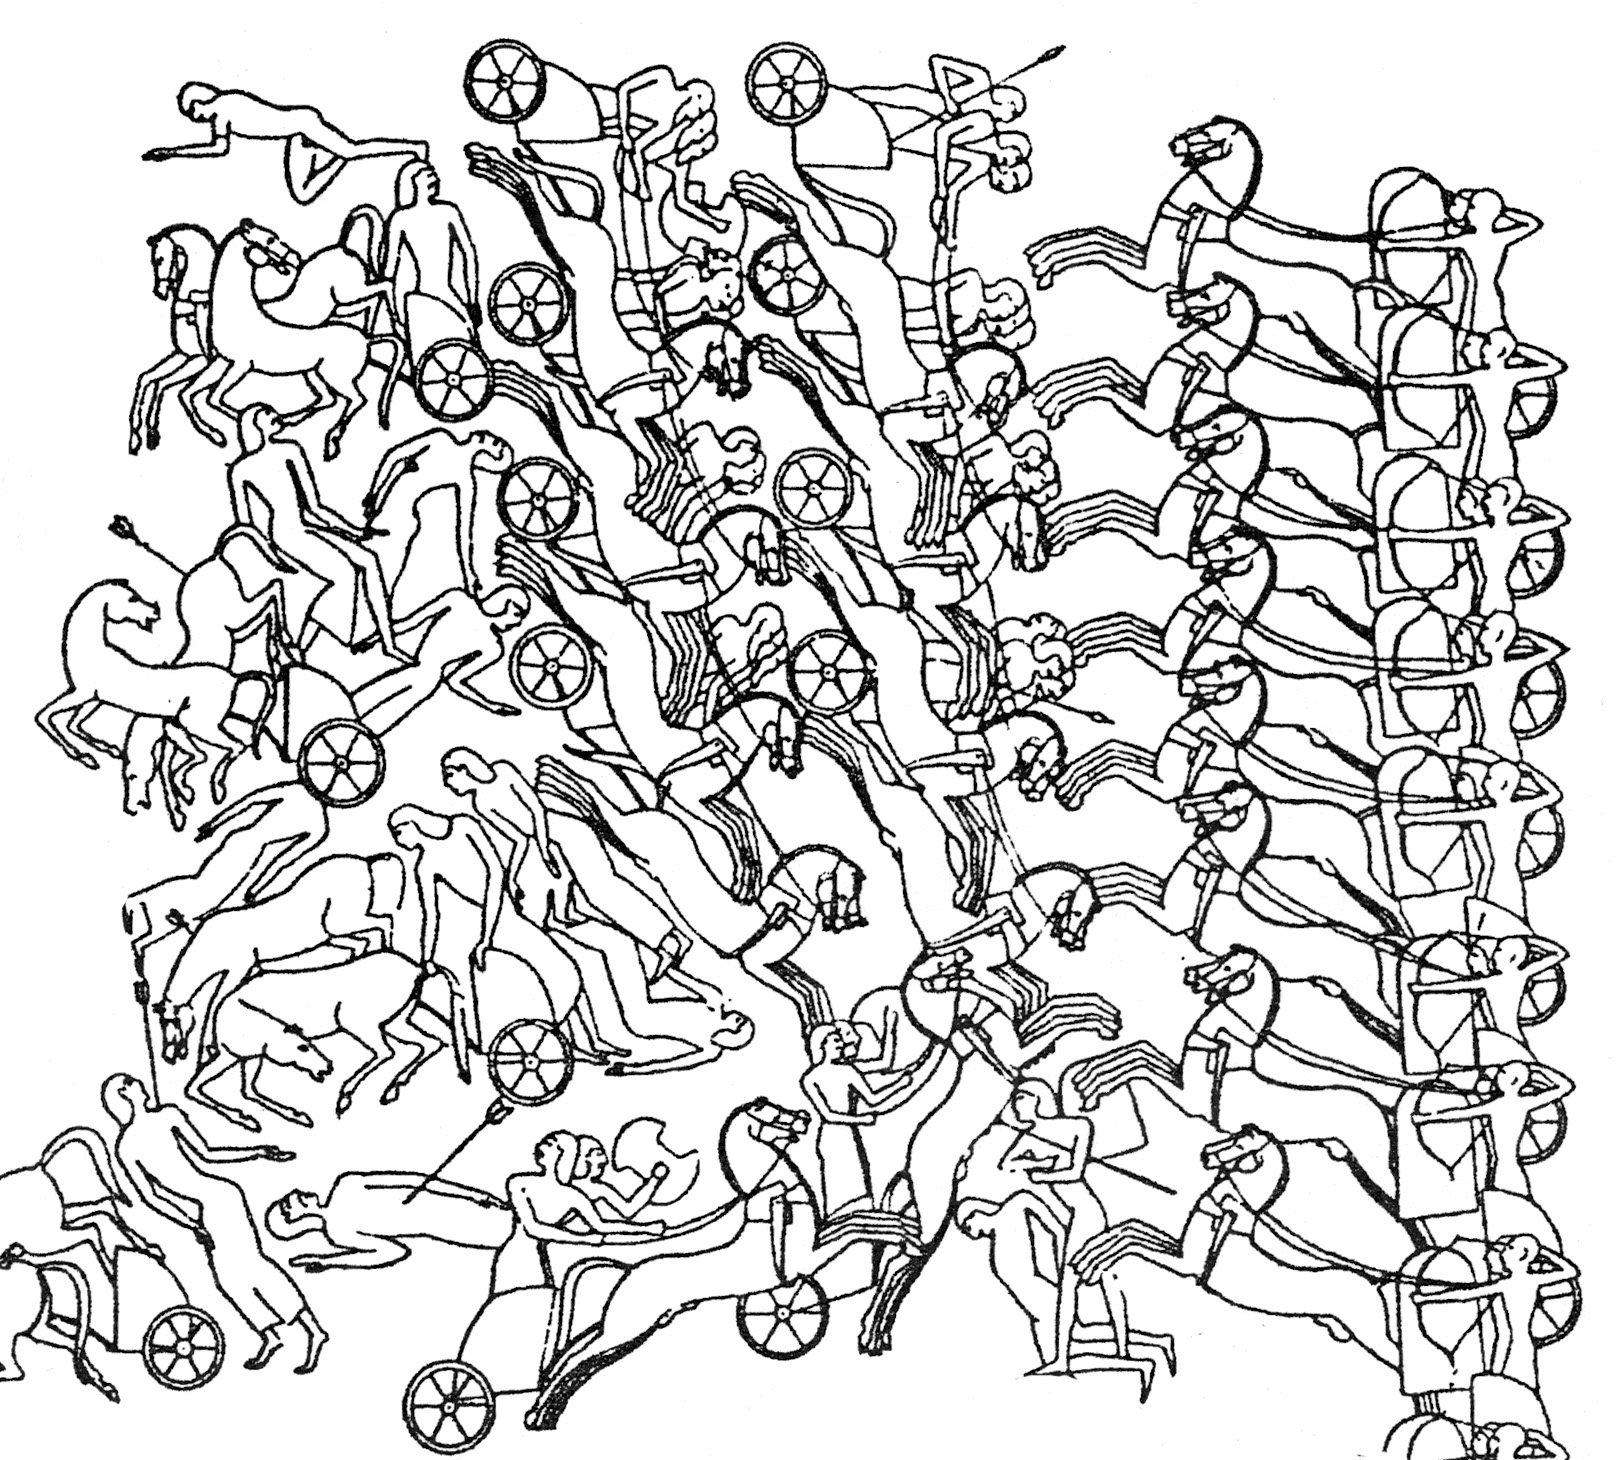 Egyptian chariotry (right) battles with Hittite three-man chariots during the Battle of Kadesh. The Hittite crewman at the top of the picture is armed with a lance, held upright and resting on his shoulder. He would have to dismount to wield the weapon effectively.